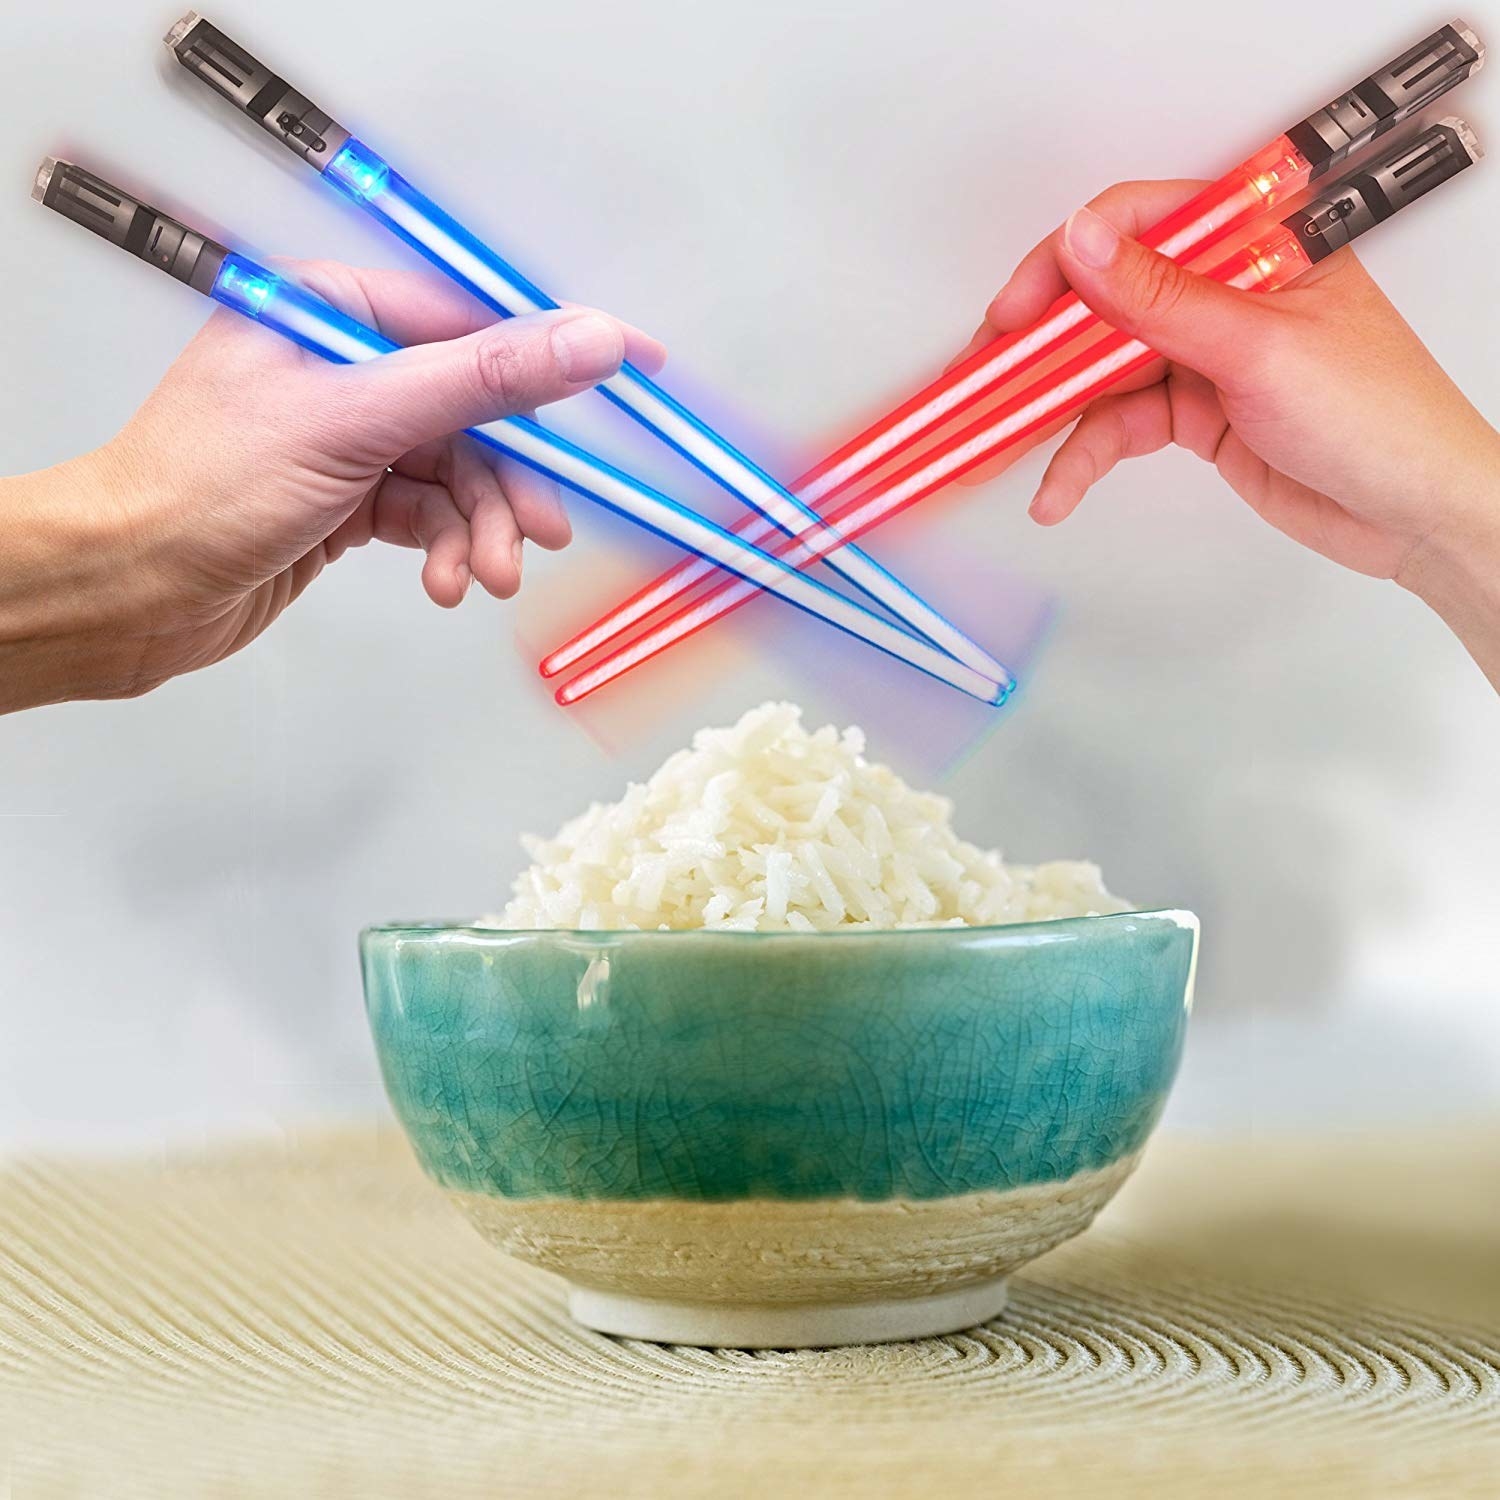 Two people holding the light-up chopsticks.